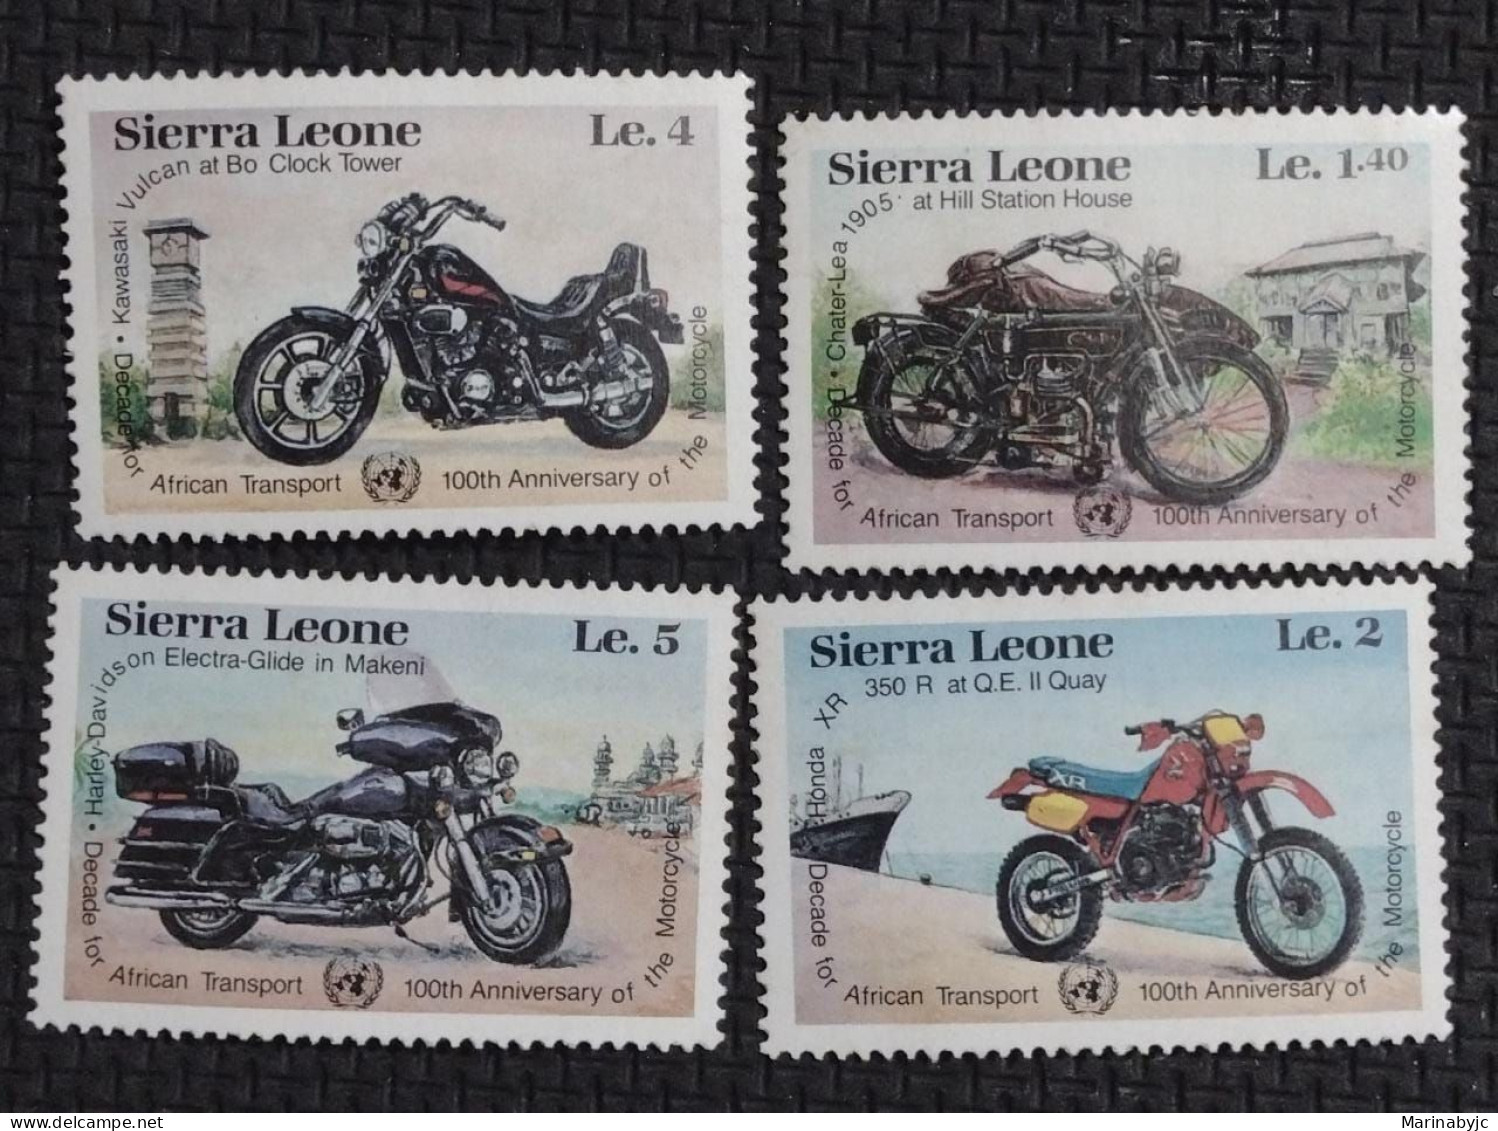 BD) SIERRA LEONE, DECADE FOR AFRICAN TRANSPORTATION, 100TH ANNIVERSARY OF THE MOTORCYCLE, KAWASAKI, CHATER-LEA, HARLEY D - Sierra Leone